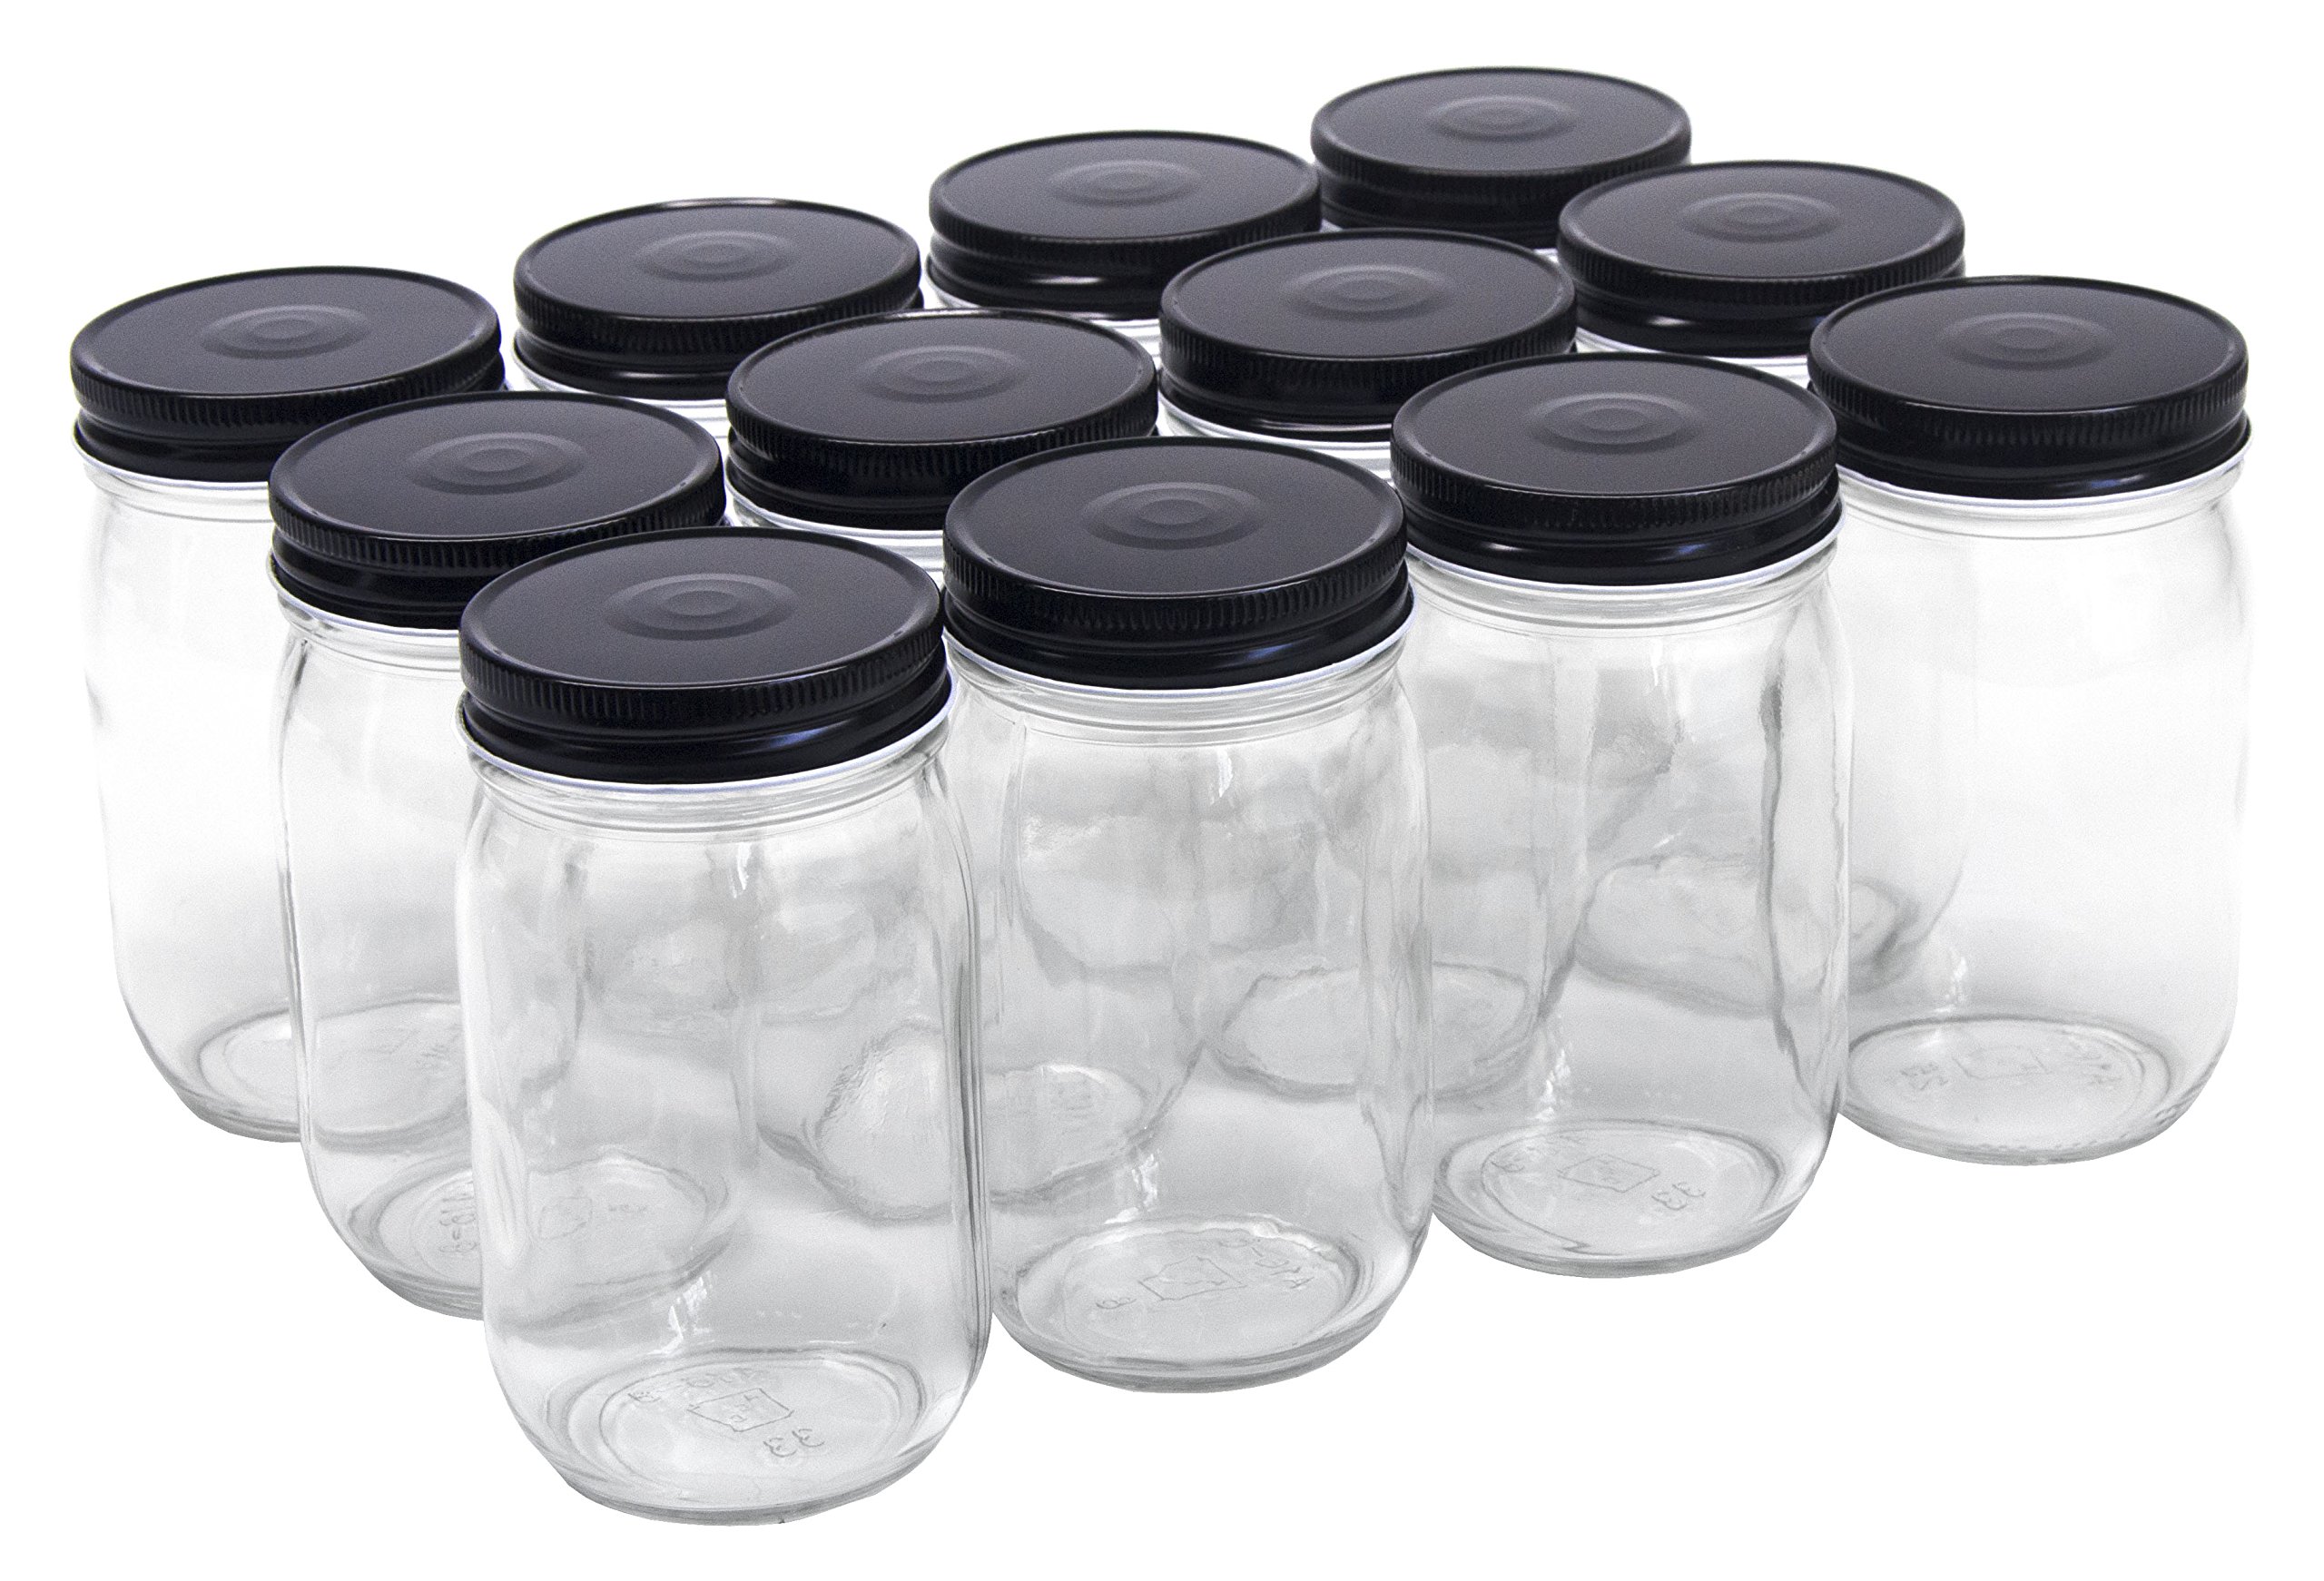 North Mountain Supply 16oz-RM-BK 16 Ounce glass Regular Mouth Mason canning Jars - With Safety Button Lids - case of 12 (Black M